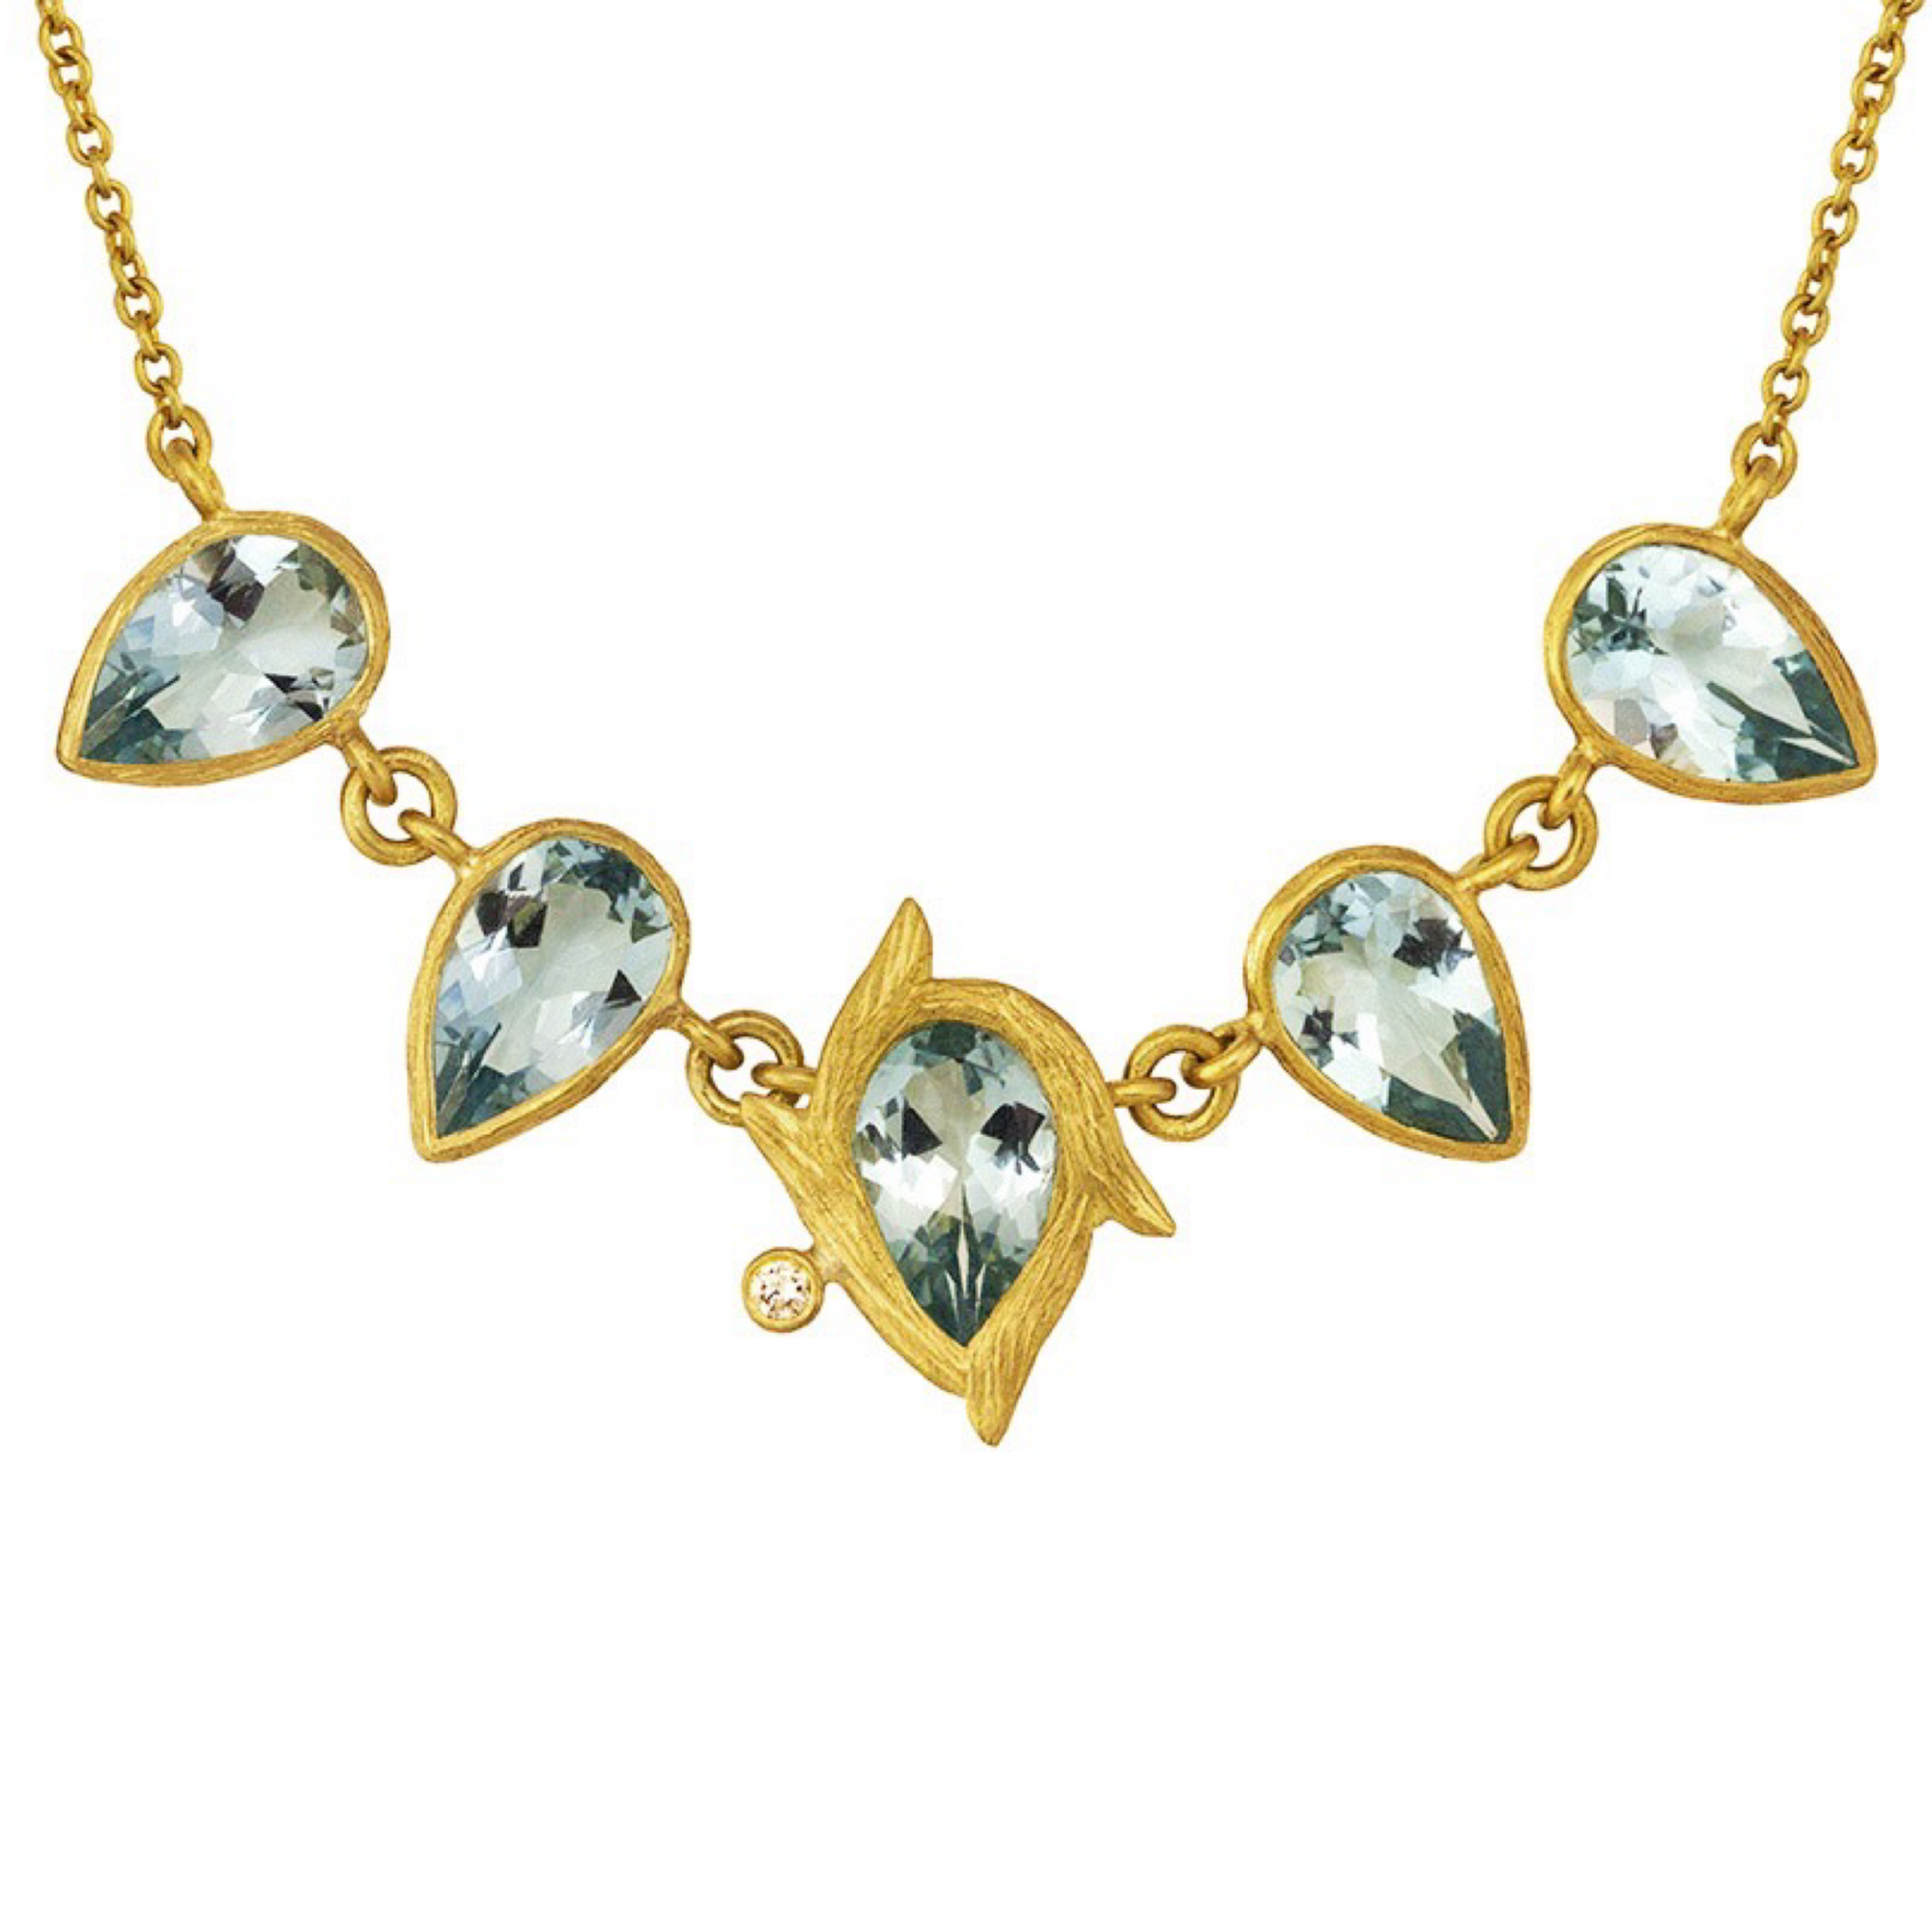 Aquamarine Vine Chain Necklace by Laurie Kaiser available at Talisman Collection Fine Jewelers in El Dorado Hills, CA and online. The five small pear-cut aquamarines are bezel-set and arranged on an 18k yellow gold chain, with a .02 ct white brilliant diamond accent. You will feel pretty every time you put it on.